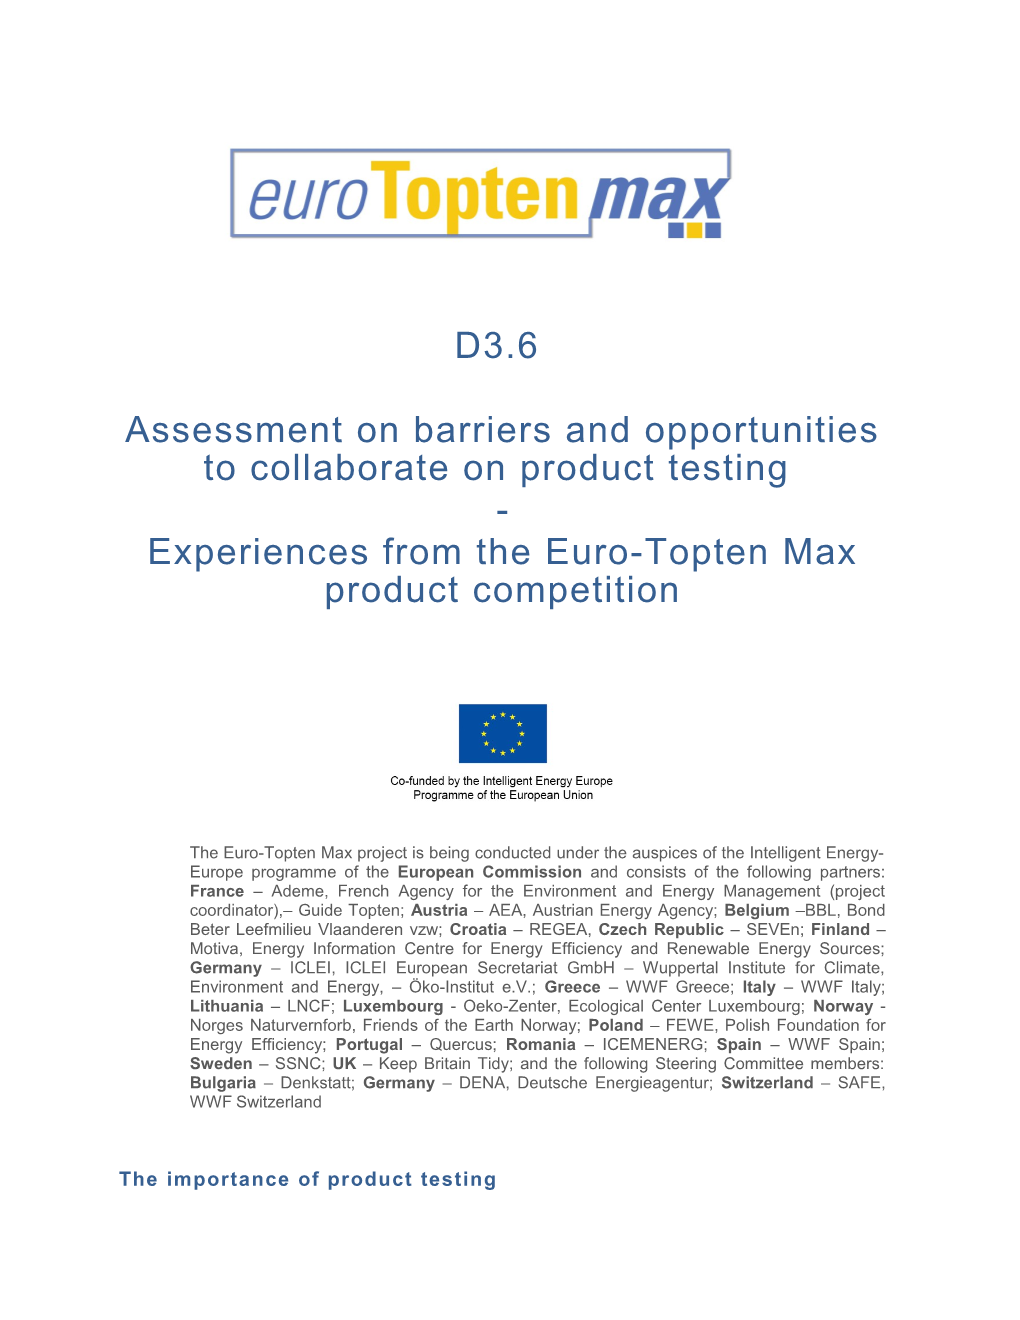 Assessment on Barriers and Opportunities to Collaborate on Product Testing